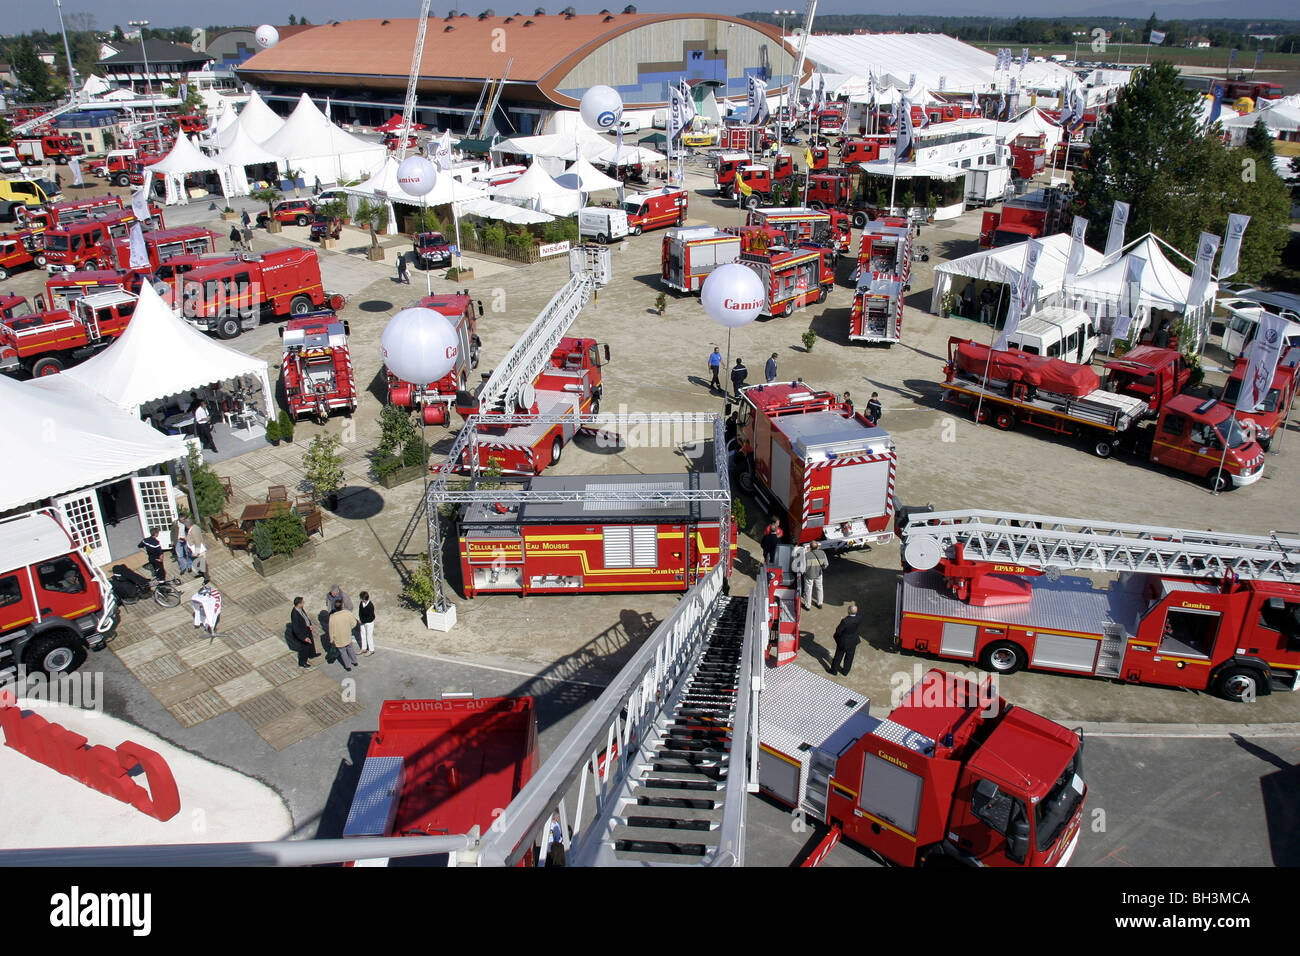 EXHIBITION OF EQUIPMENT, 110TH NATIONAL CONGRESS OF FRENCH FIREFIGHTERS, BOURG-EN-BRESSE, AIN (01), FRANCE Stock Photo